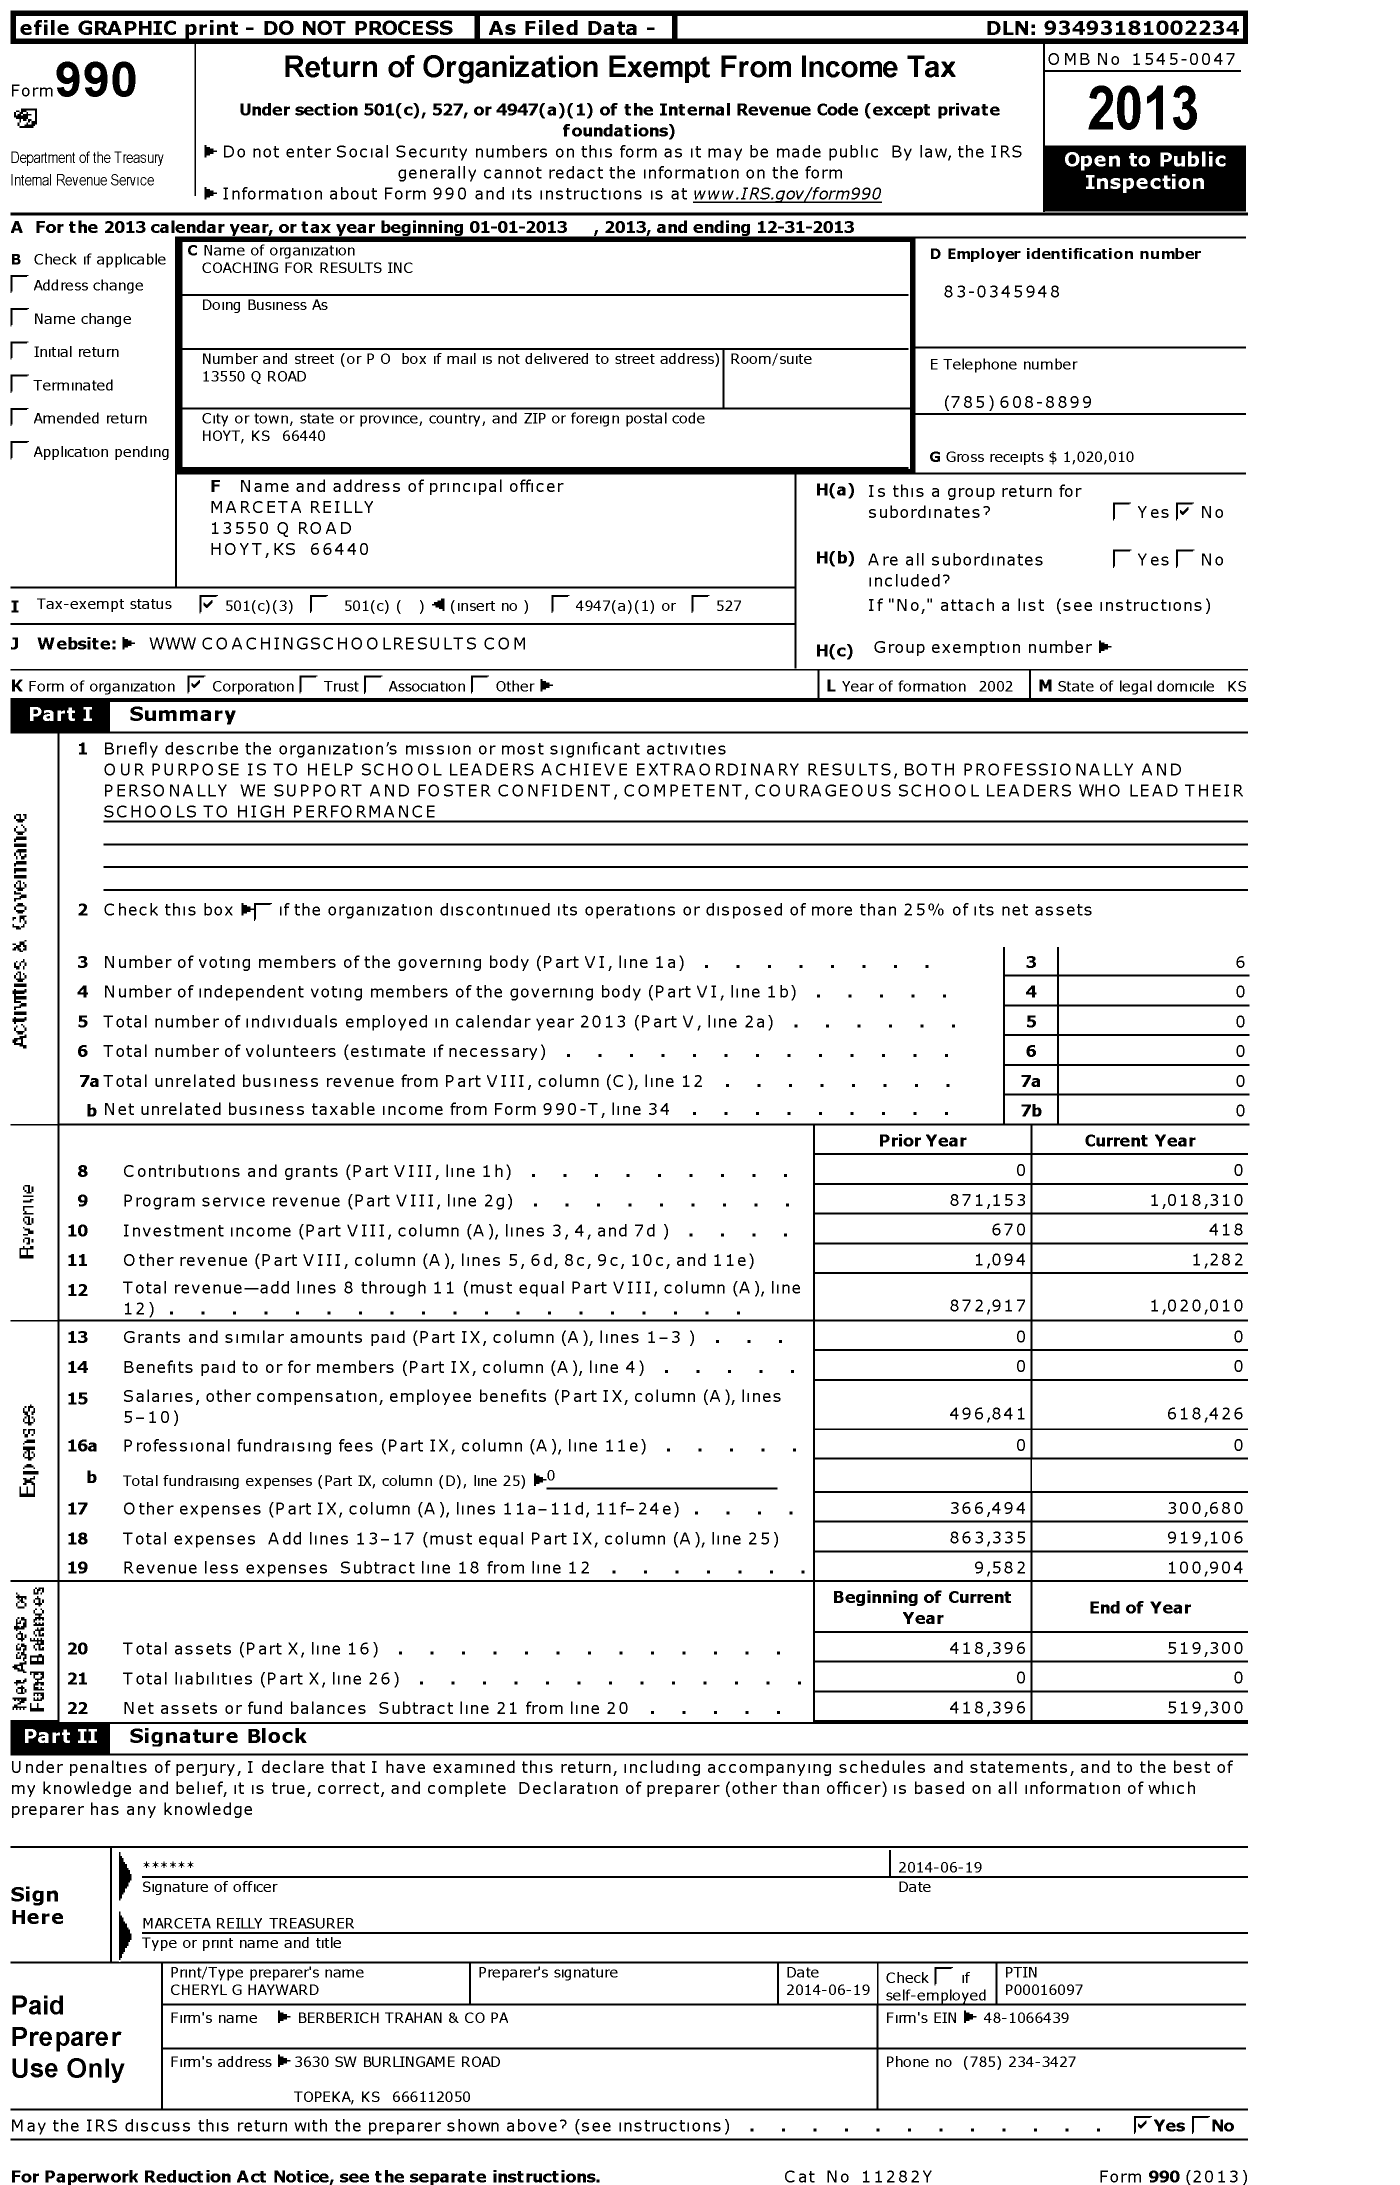 Image of first page of 2013 Form 990 for Coaching for Results